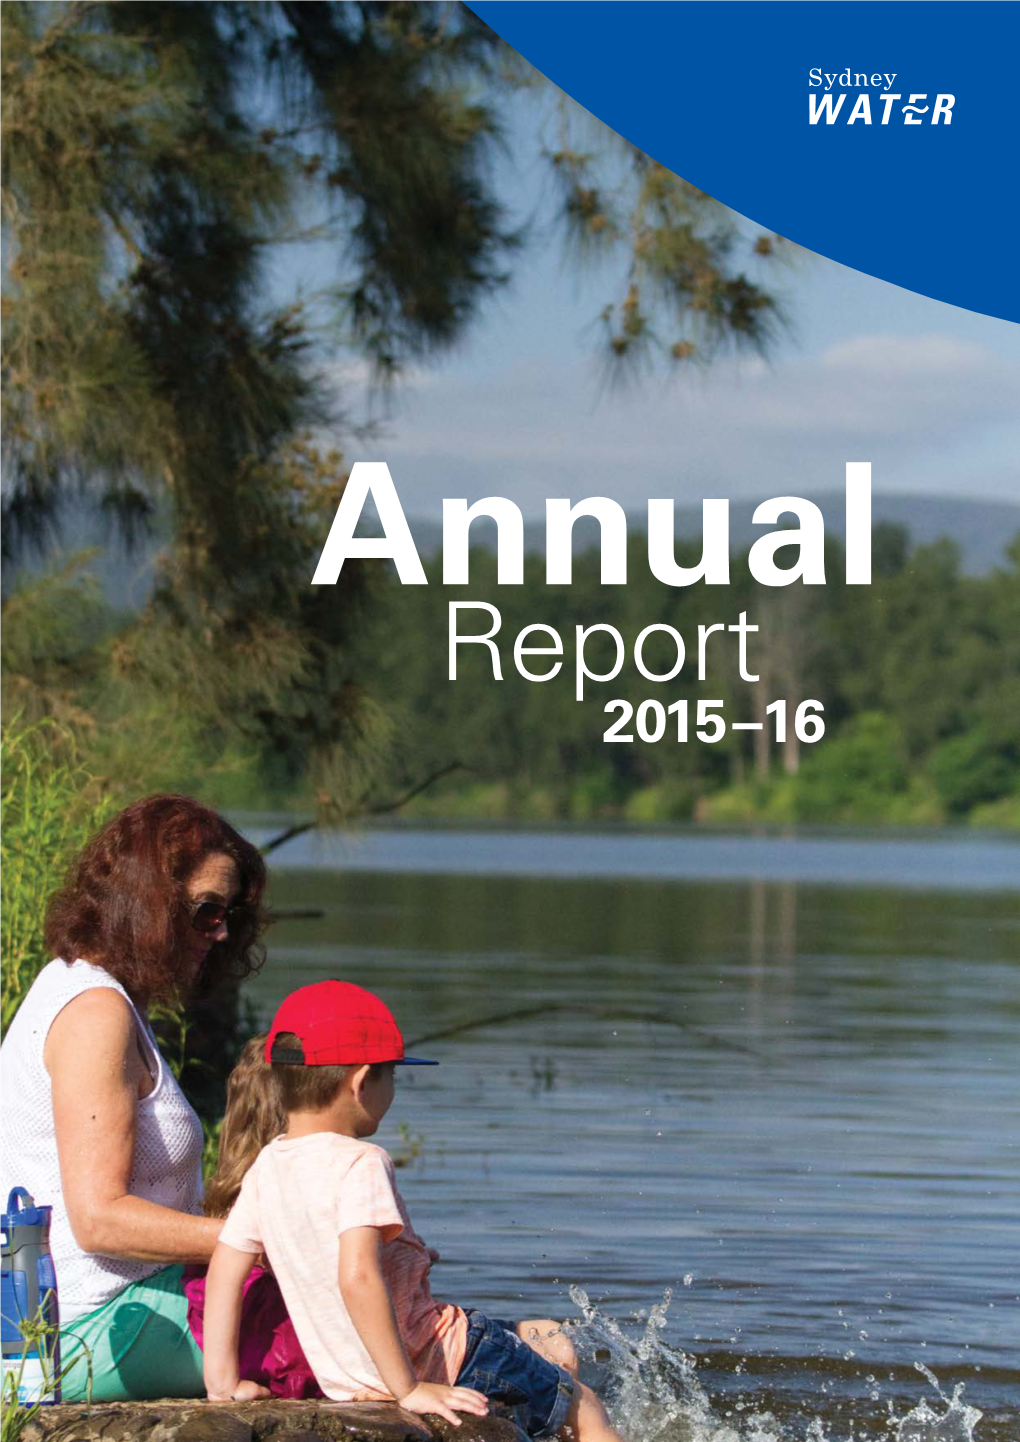 Annual Report 2015-16 Is $18,50023